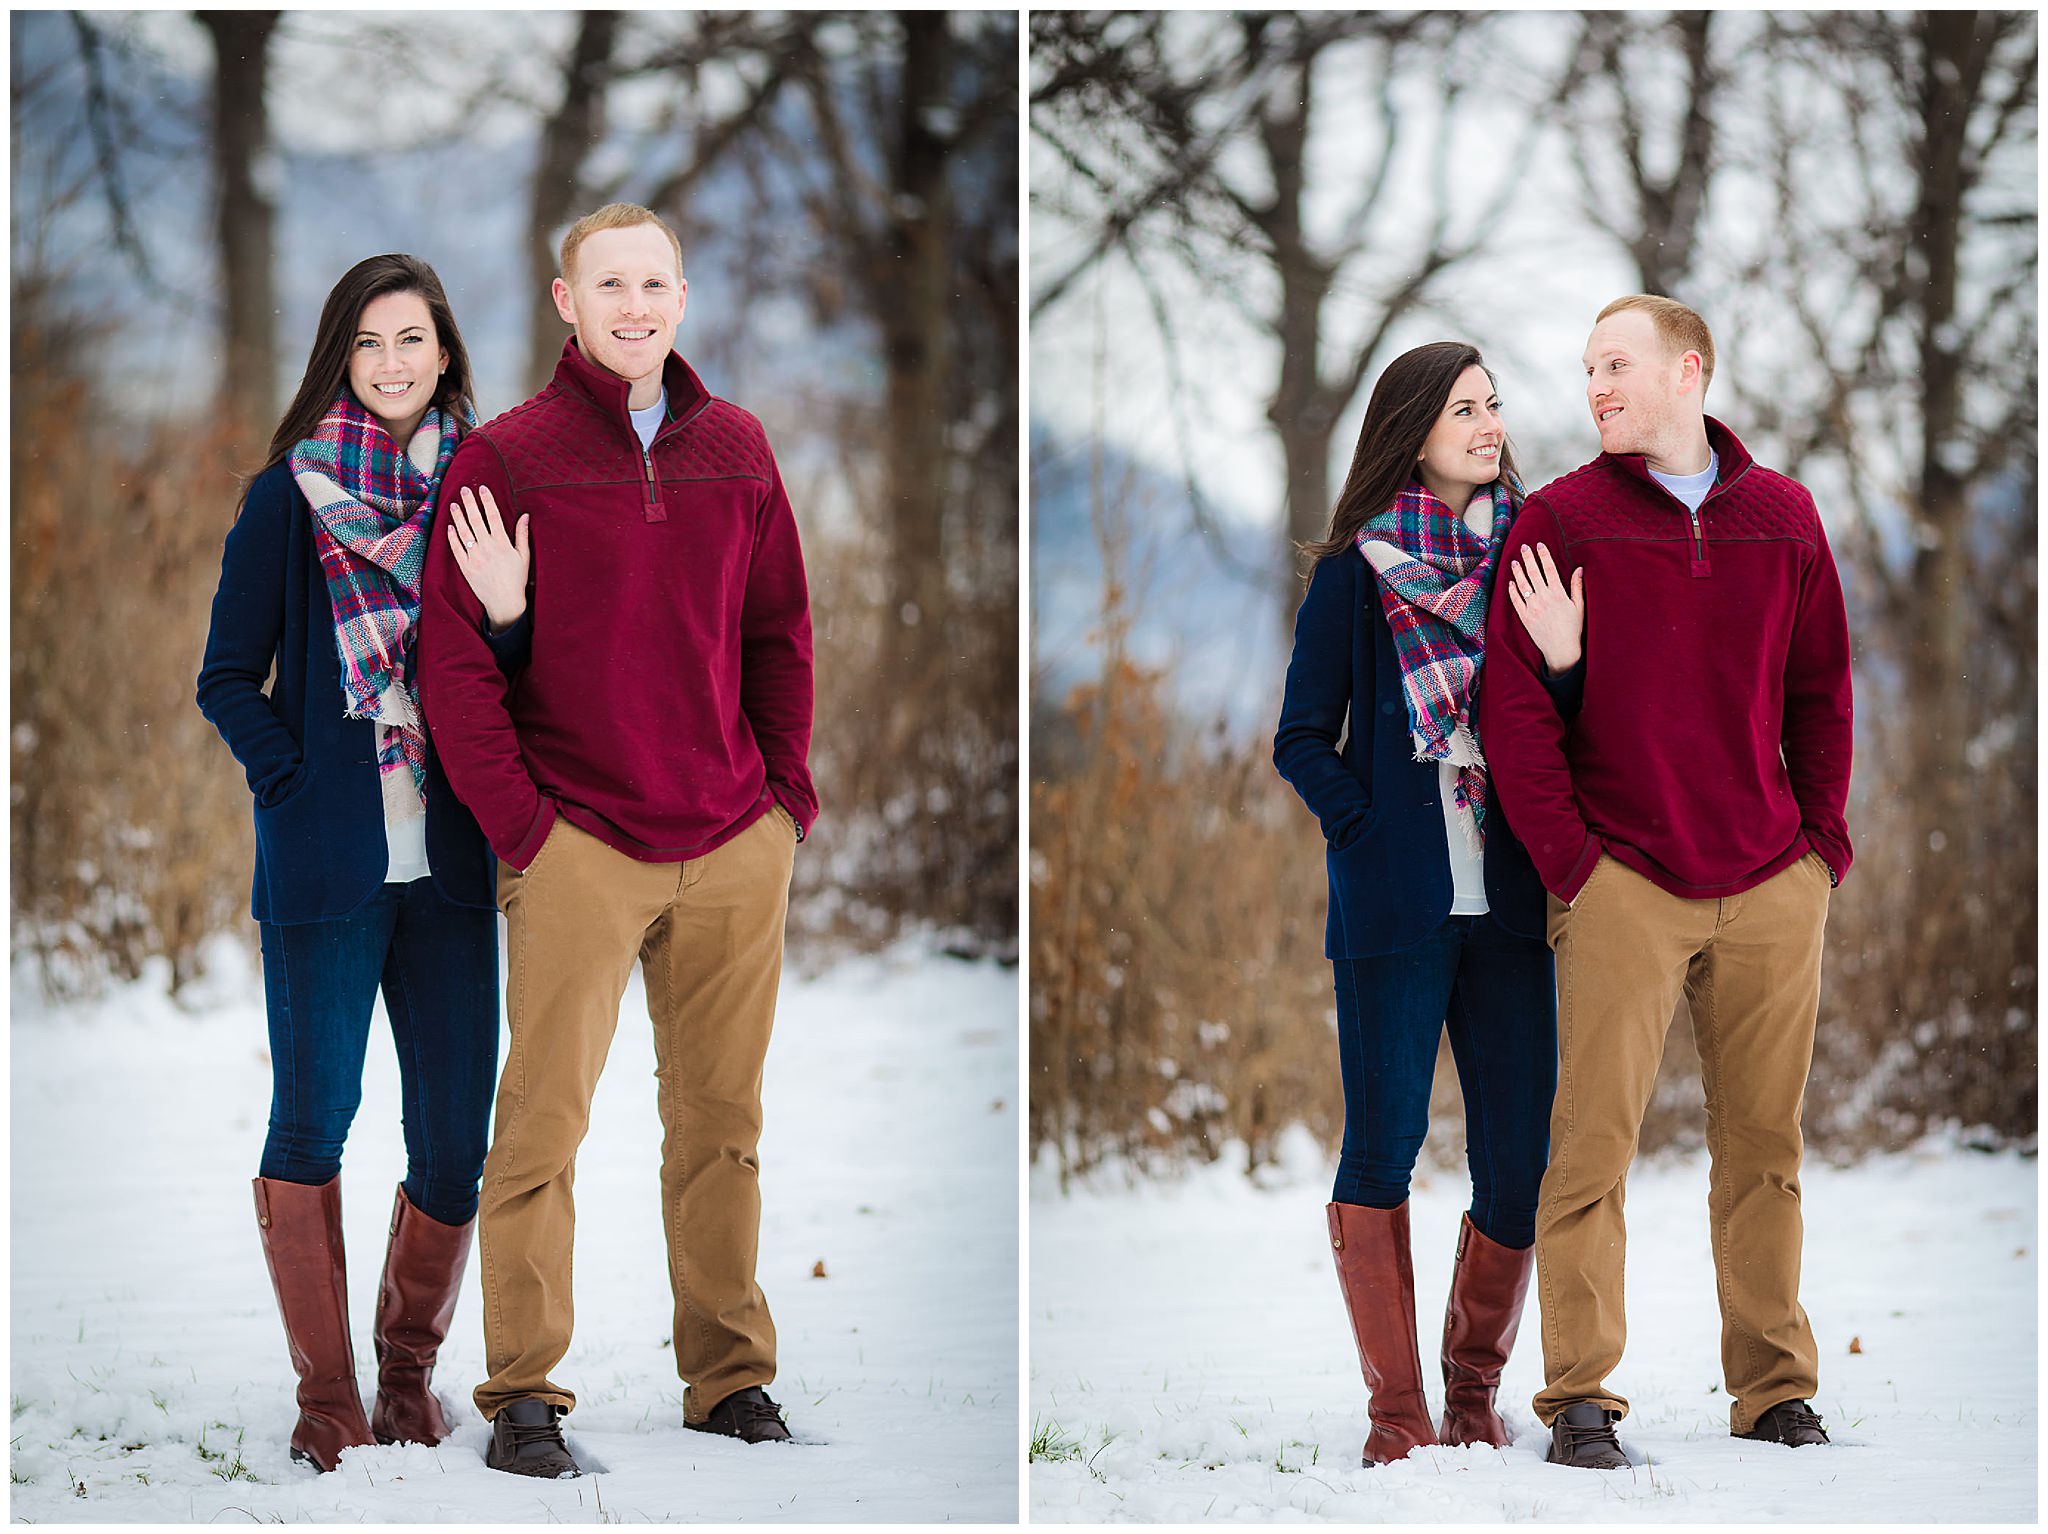 Engagement session in the snow at Point State Park